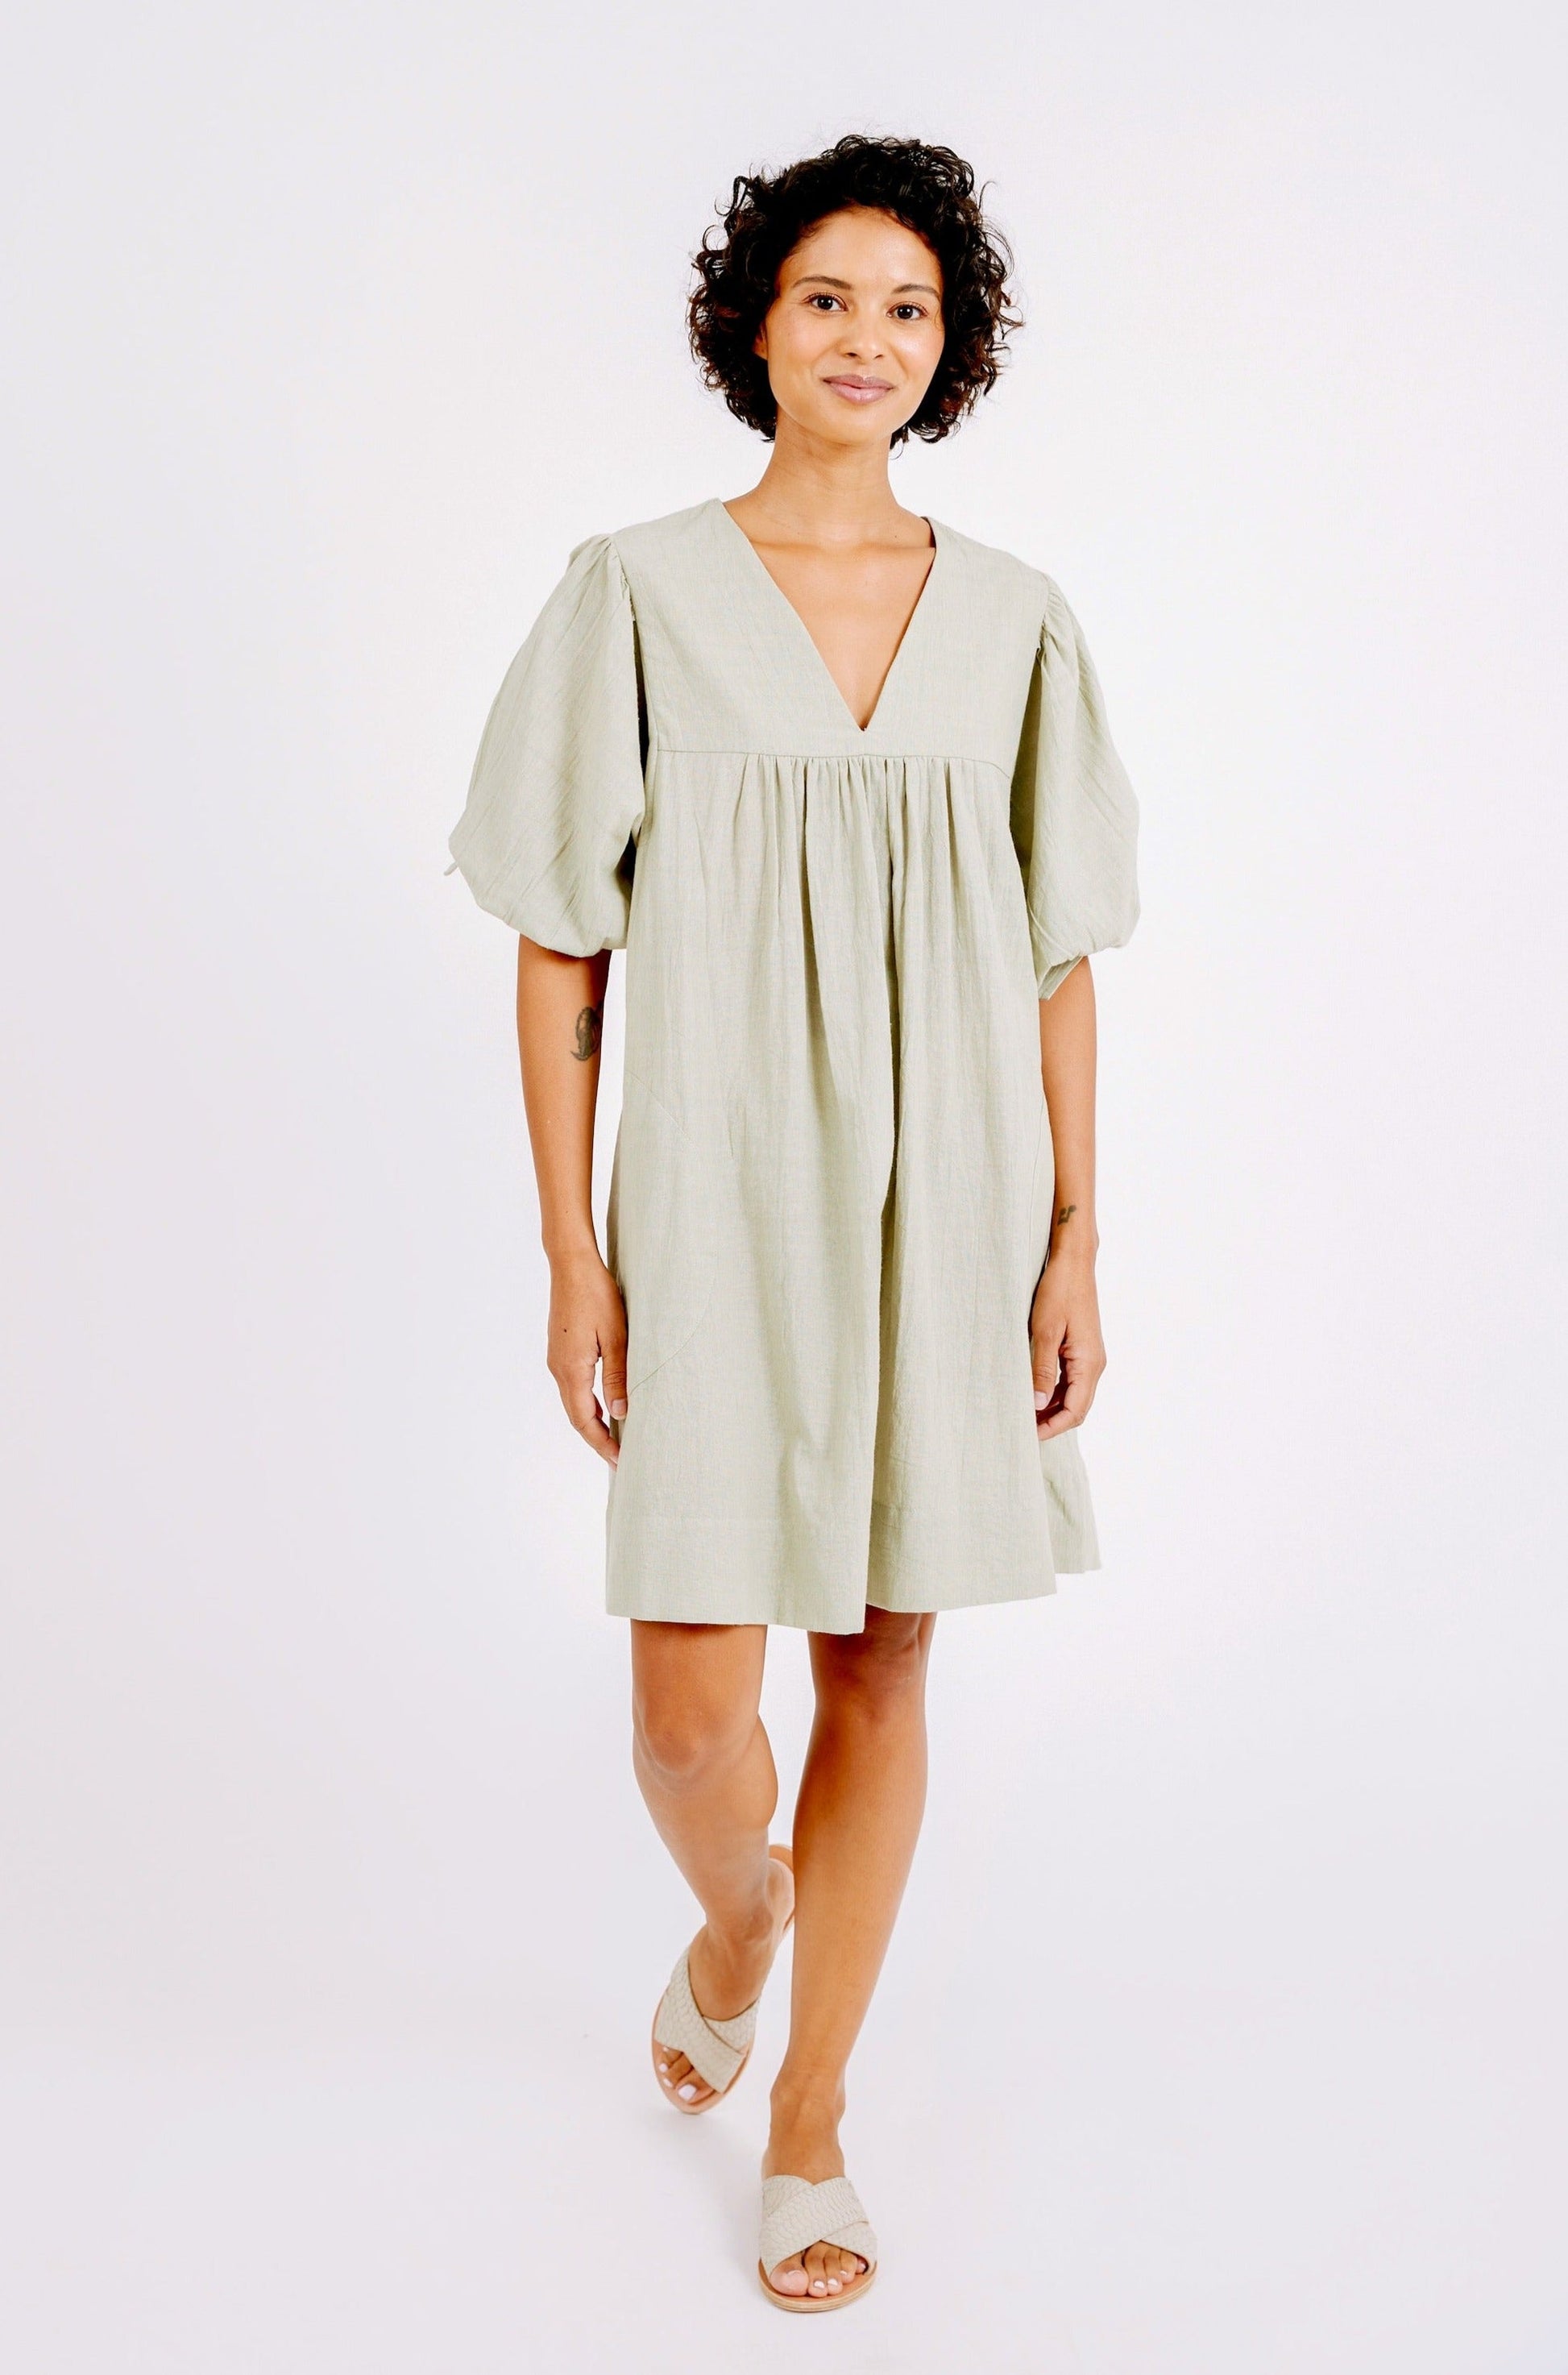 An easy, pullover style dress with a relaxed fit, made with 100% cotton that's hand loomed to give it a linen feel. Ethically made in India.